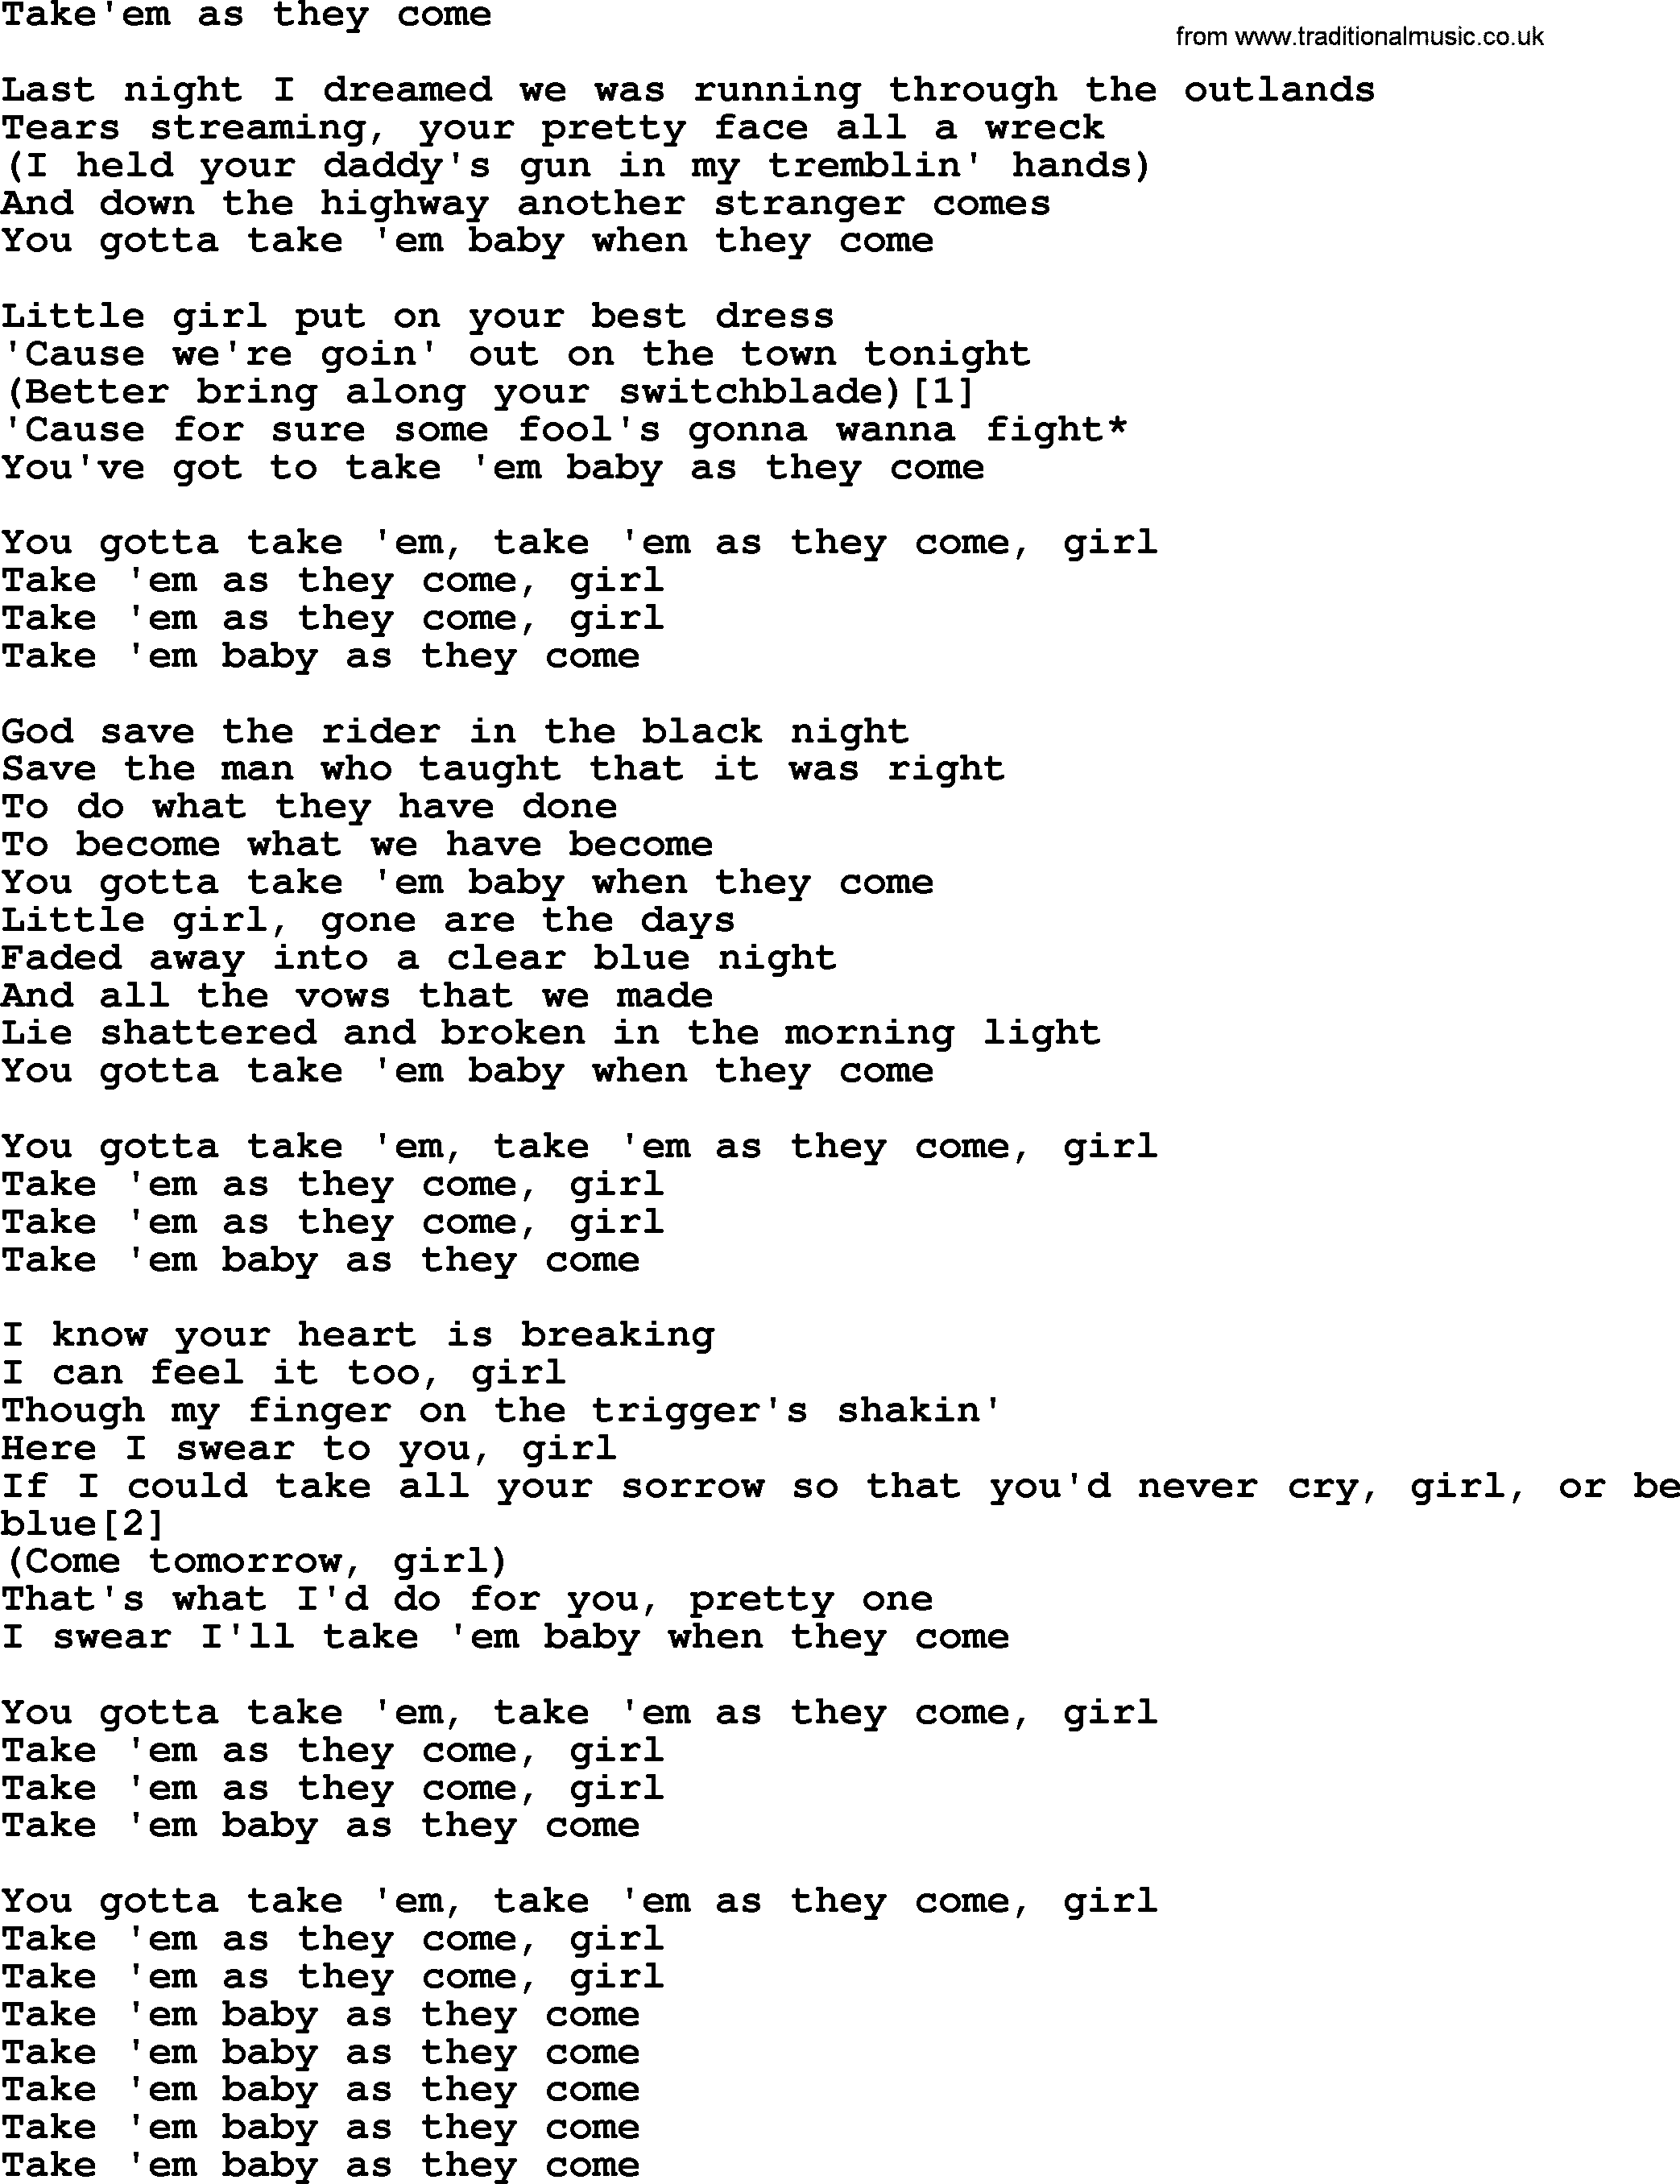 Bruce Springsteen song: Take'em As They Come lyrics